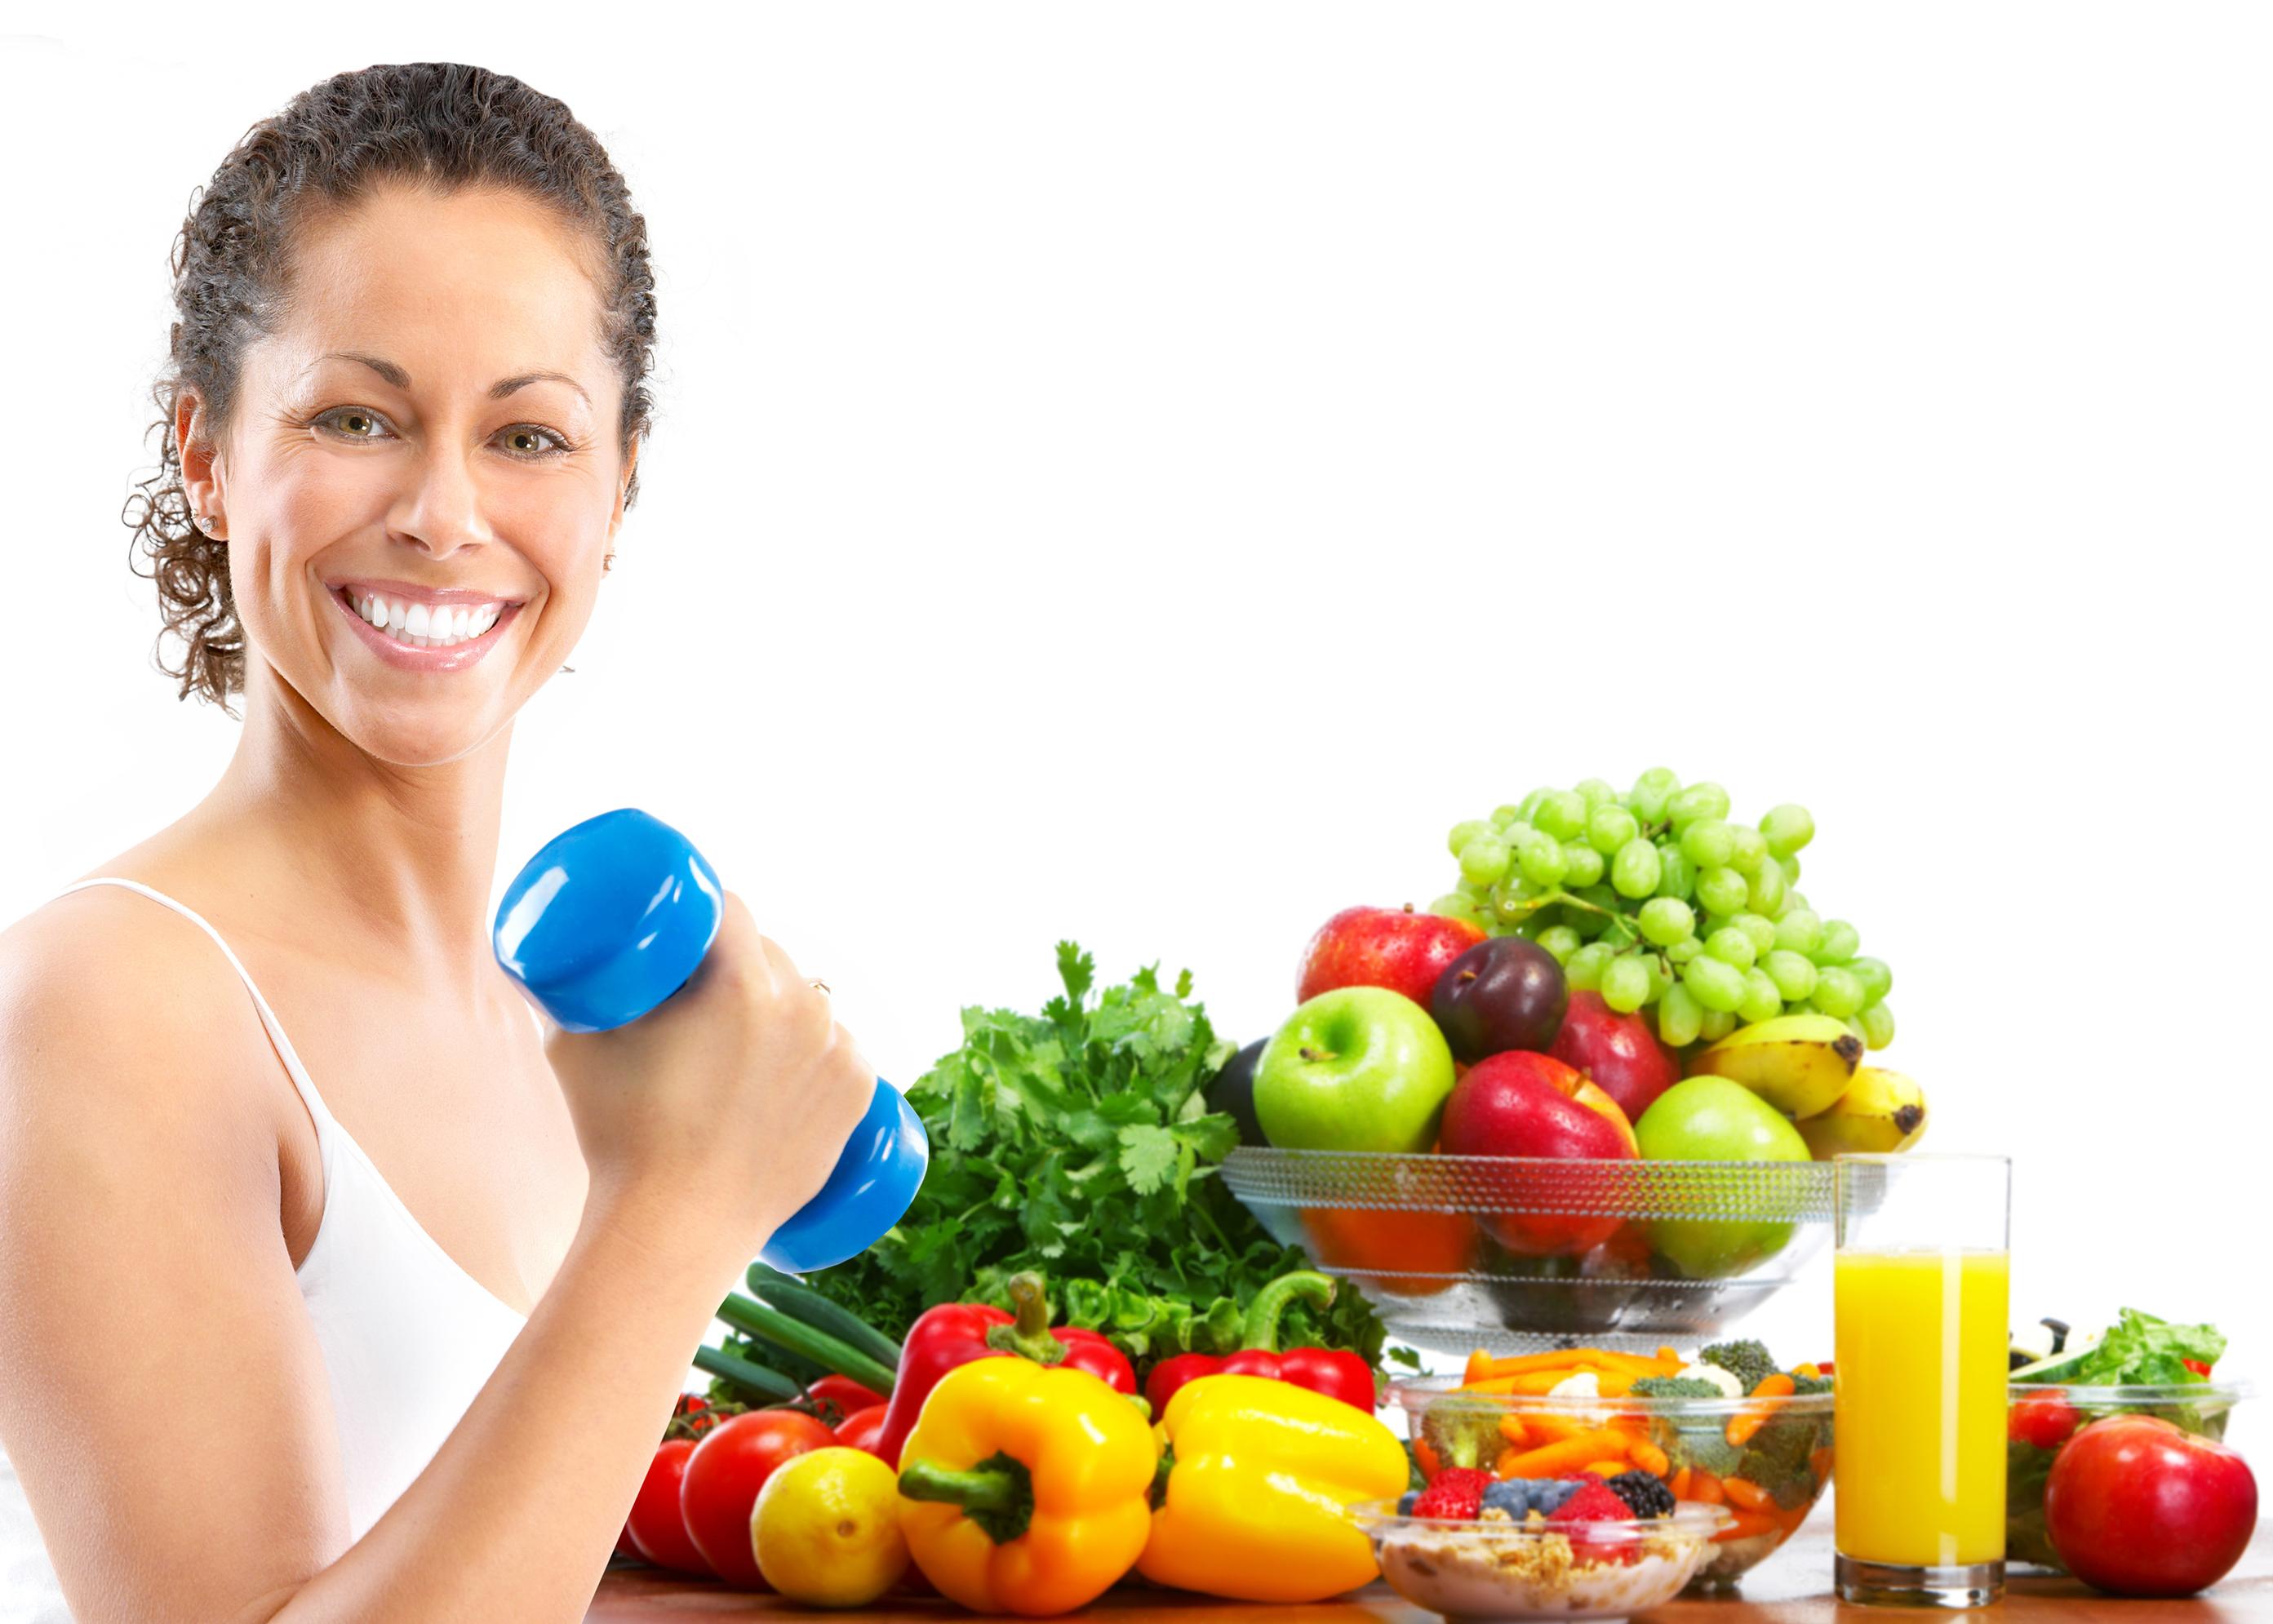 5 Simple Steps To A Healthier Lifestyle | HuffPost Life